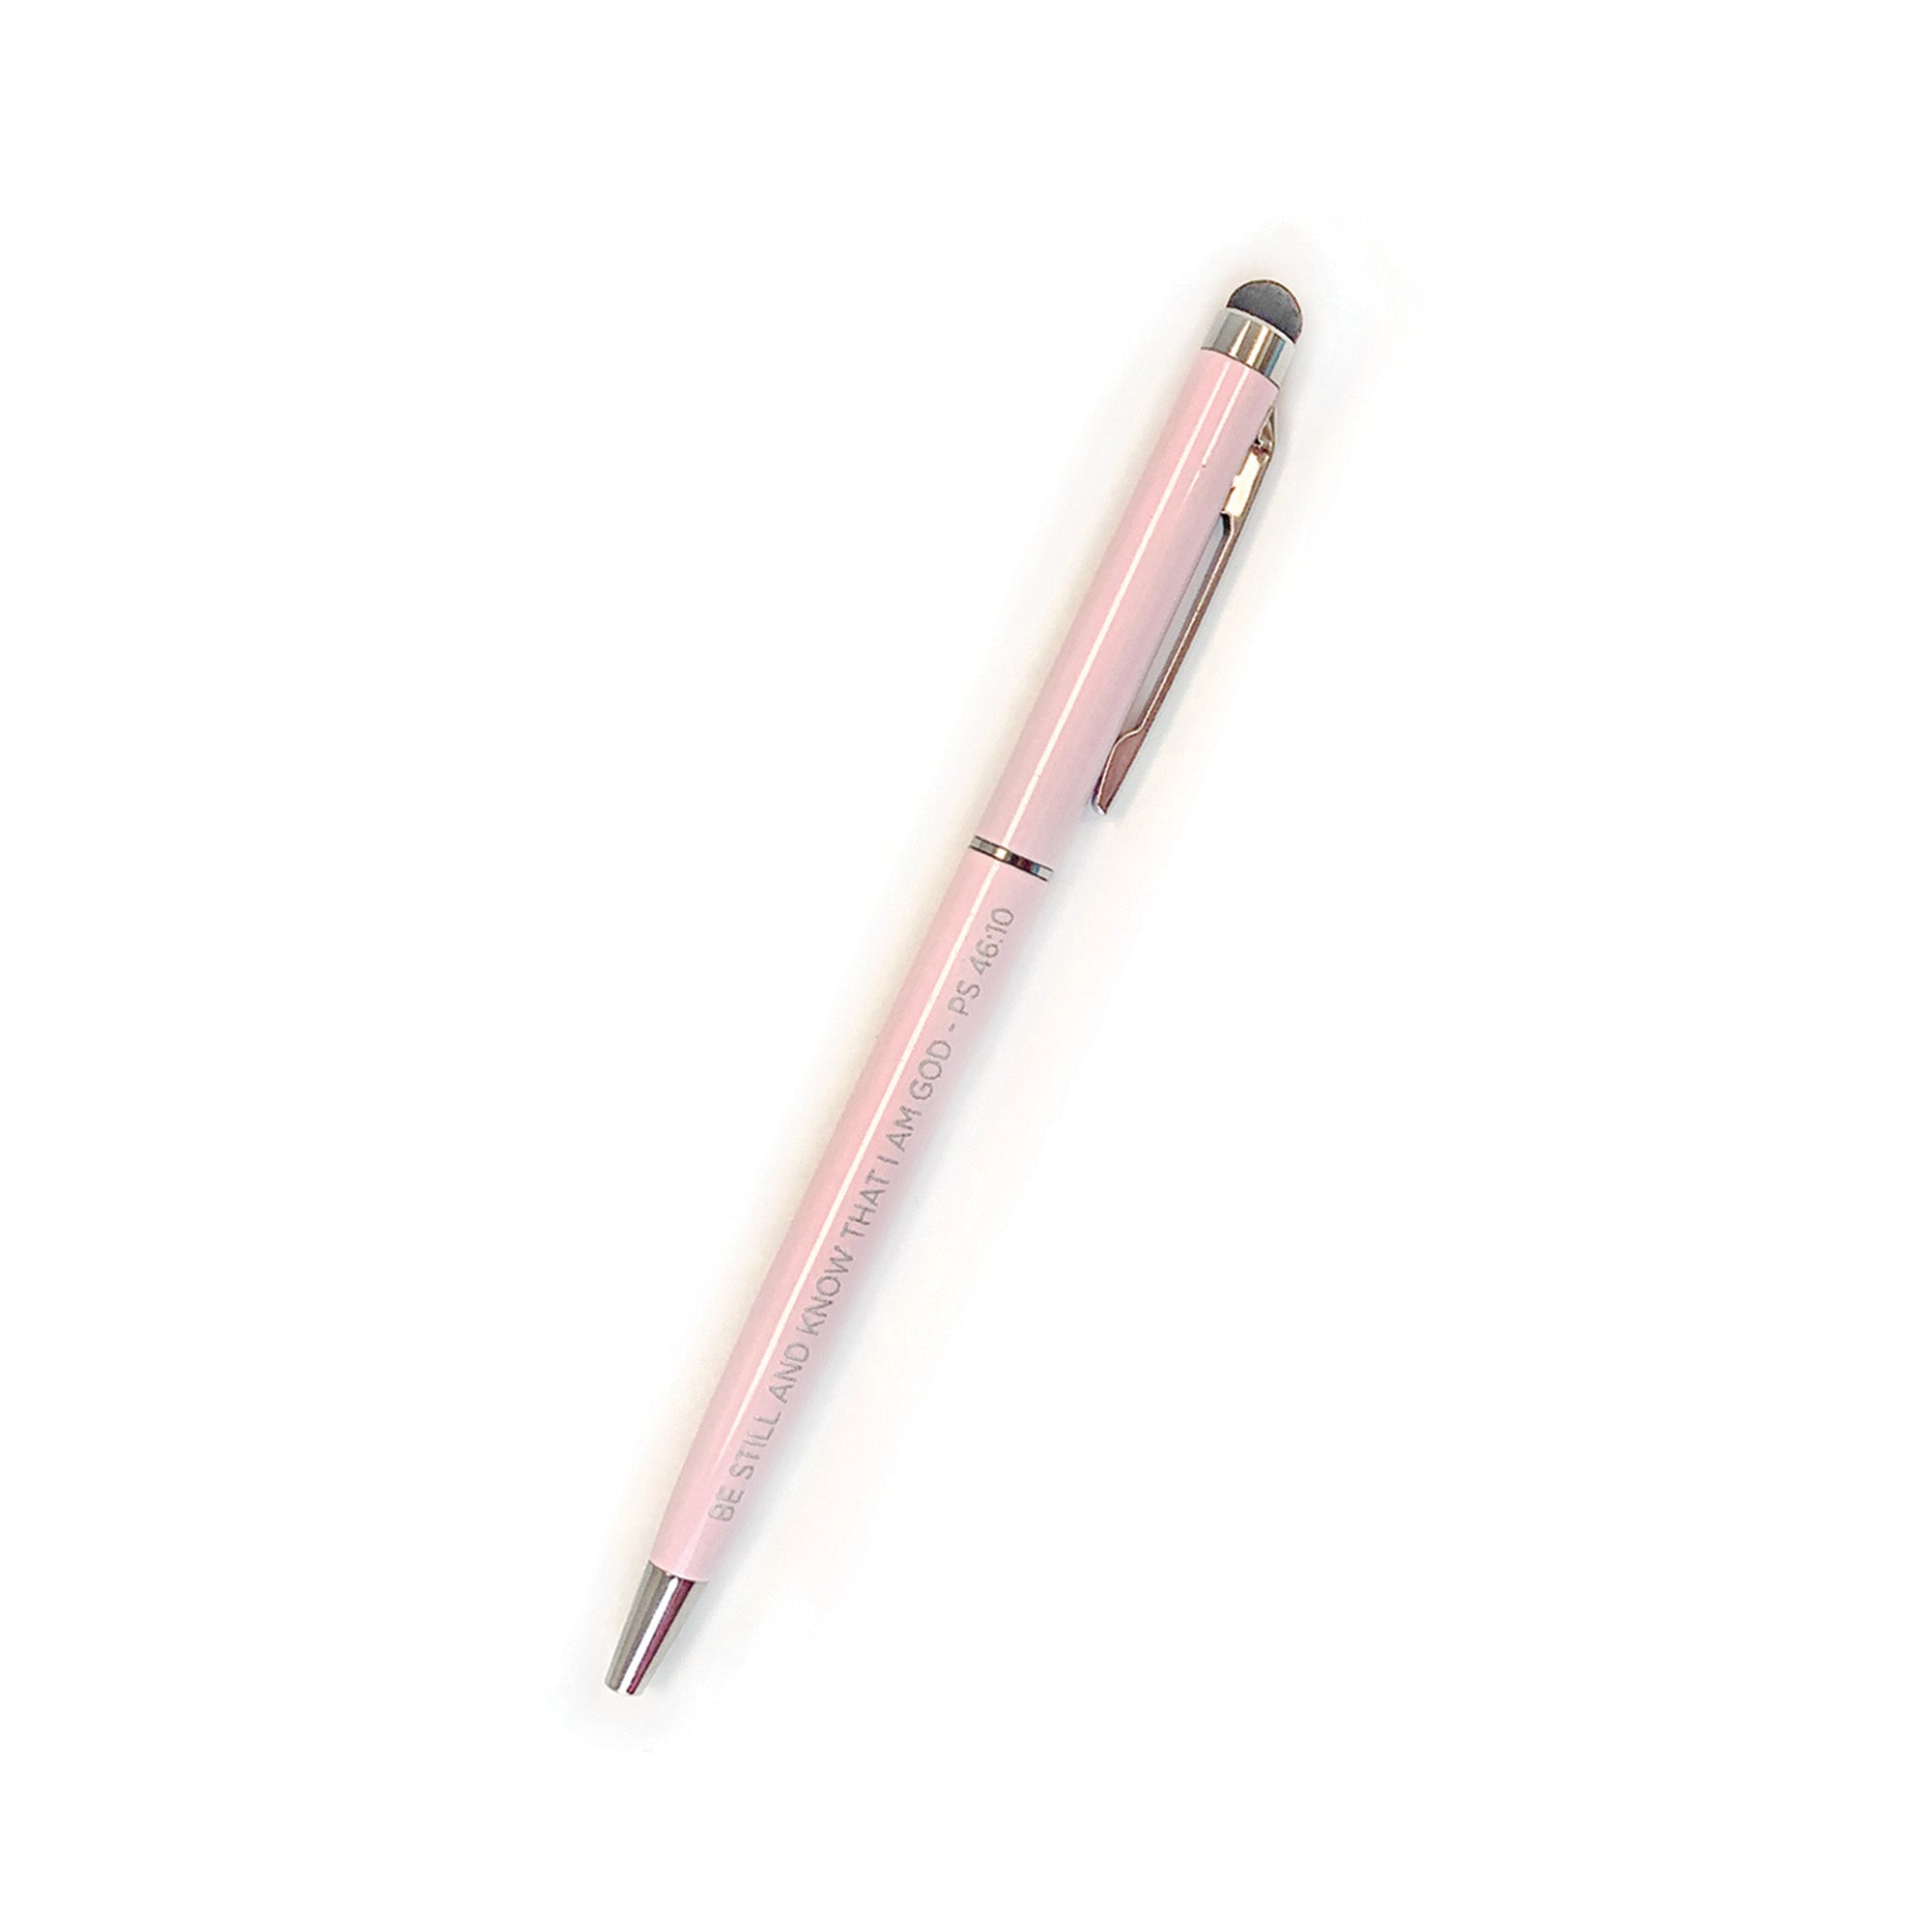 Be Still and Know Narrow Stylus Pen - Light Pink